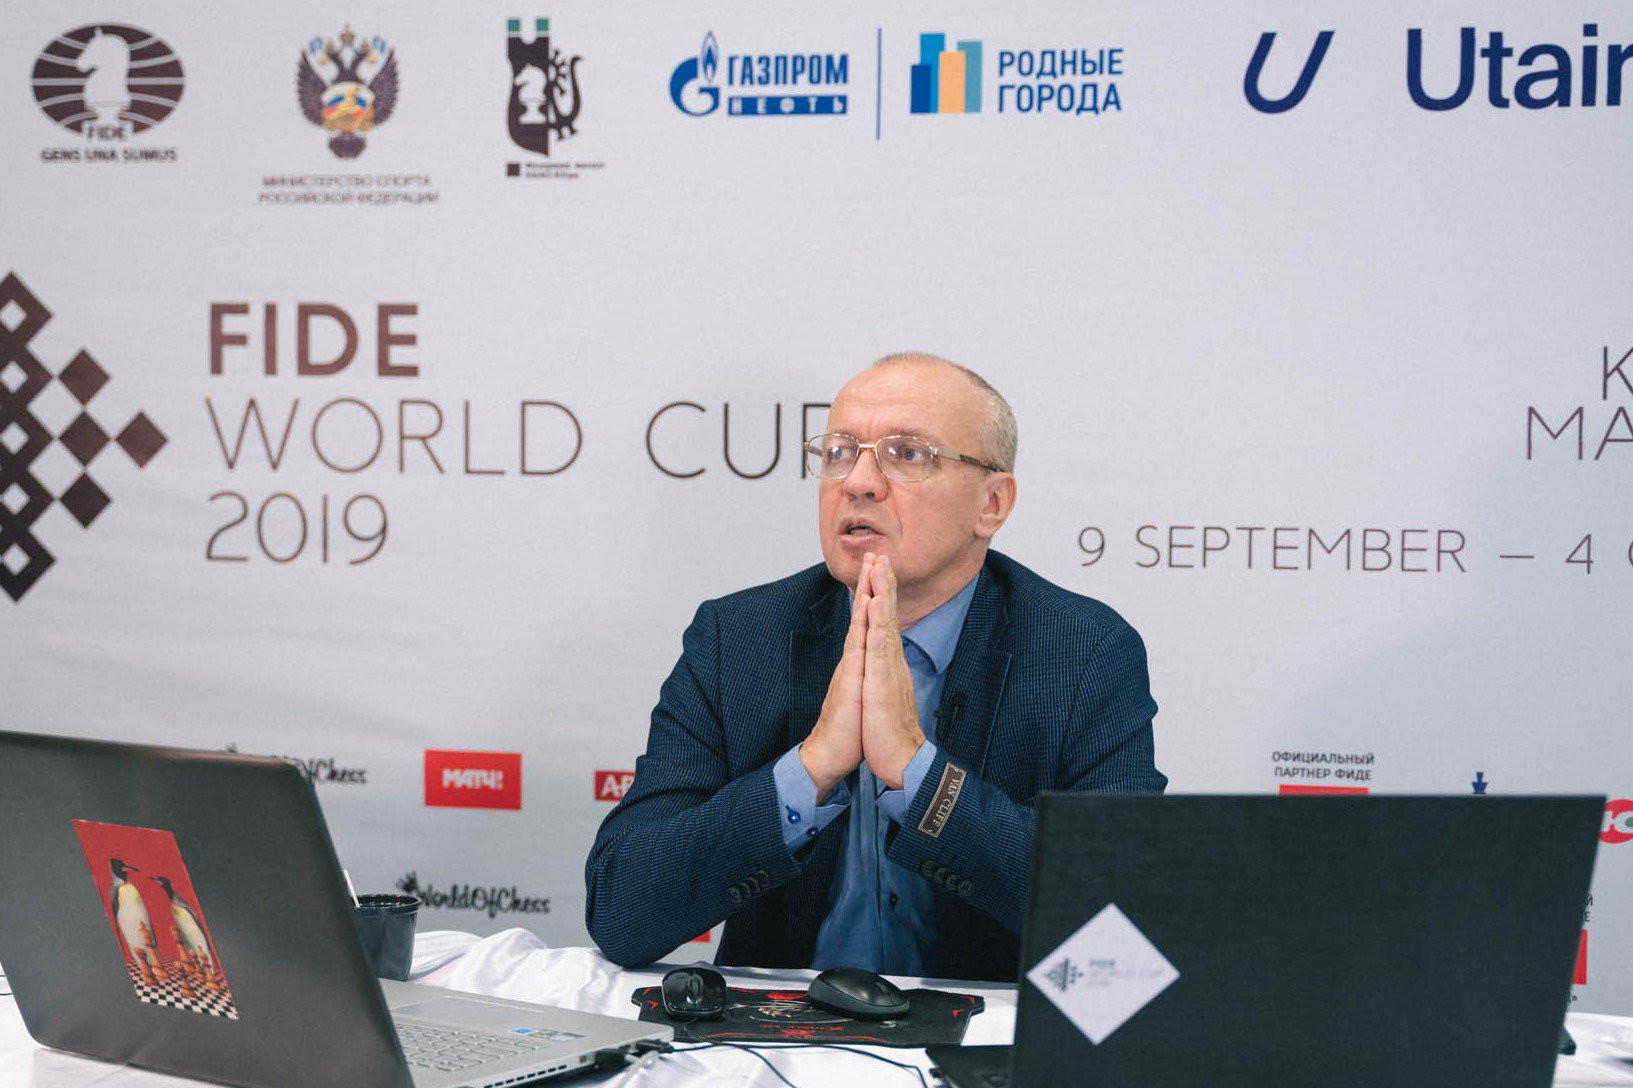 Sergei Shipov was found not guilty by the Ethics and Discipline Commission due to having a "less powerful platform" and were "slightly different and less provocative" ©FIDE/Twitter